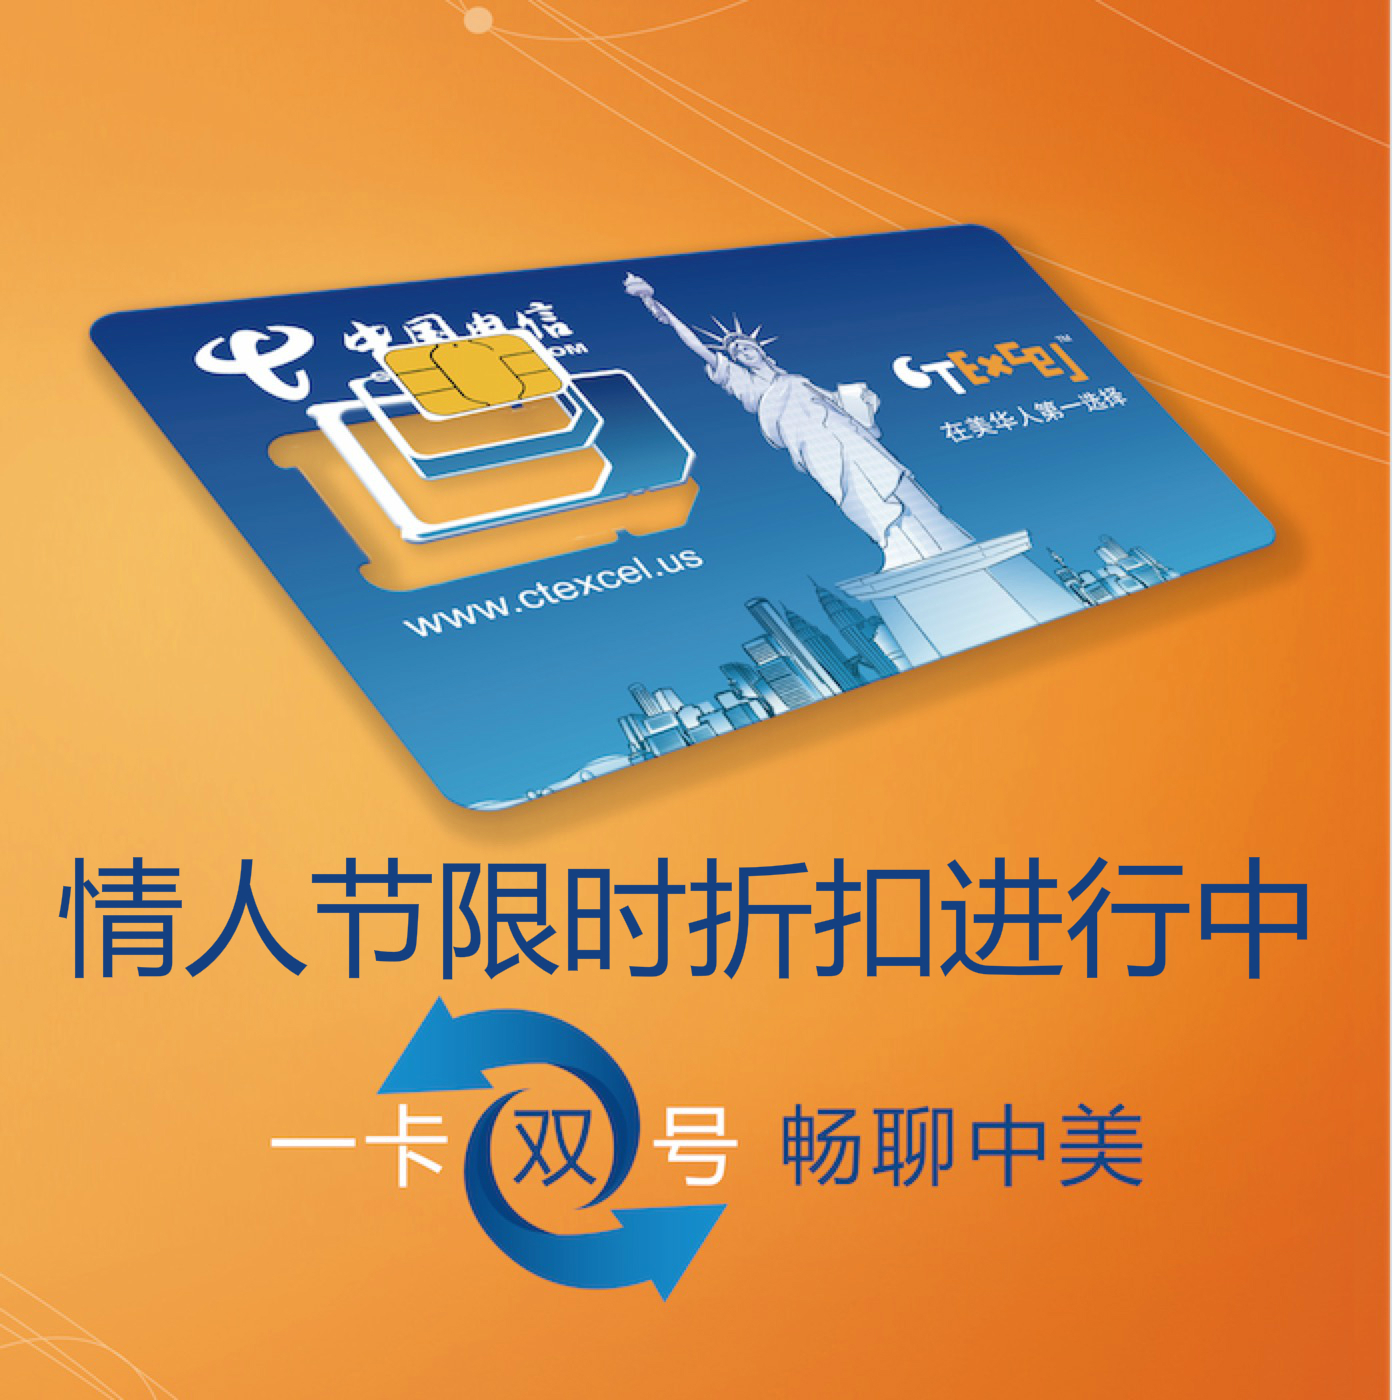 Exclusive for Valentine's Day! China Telecom US package 10% off for the first month!